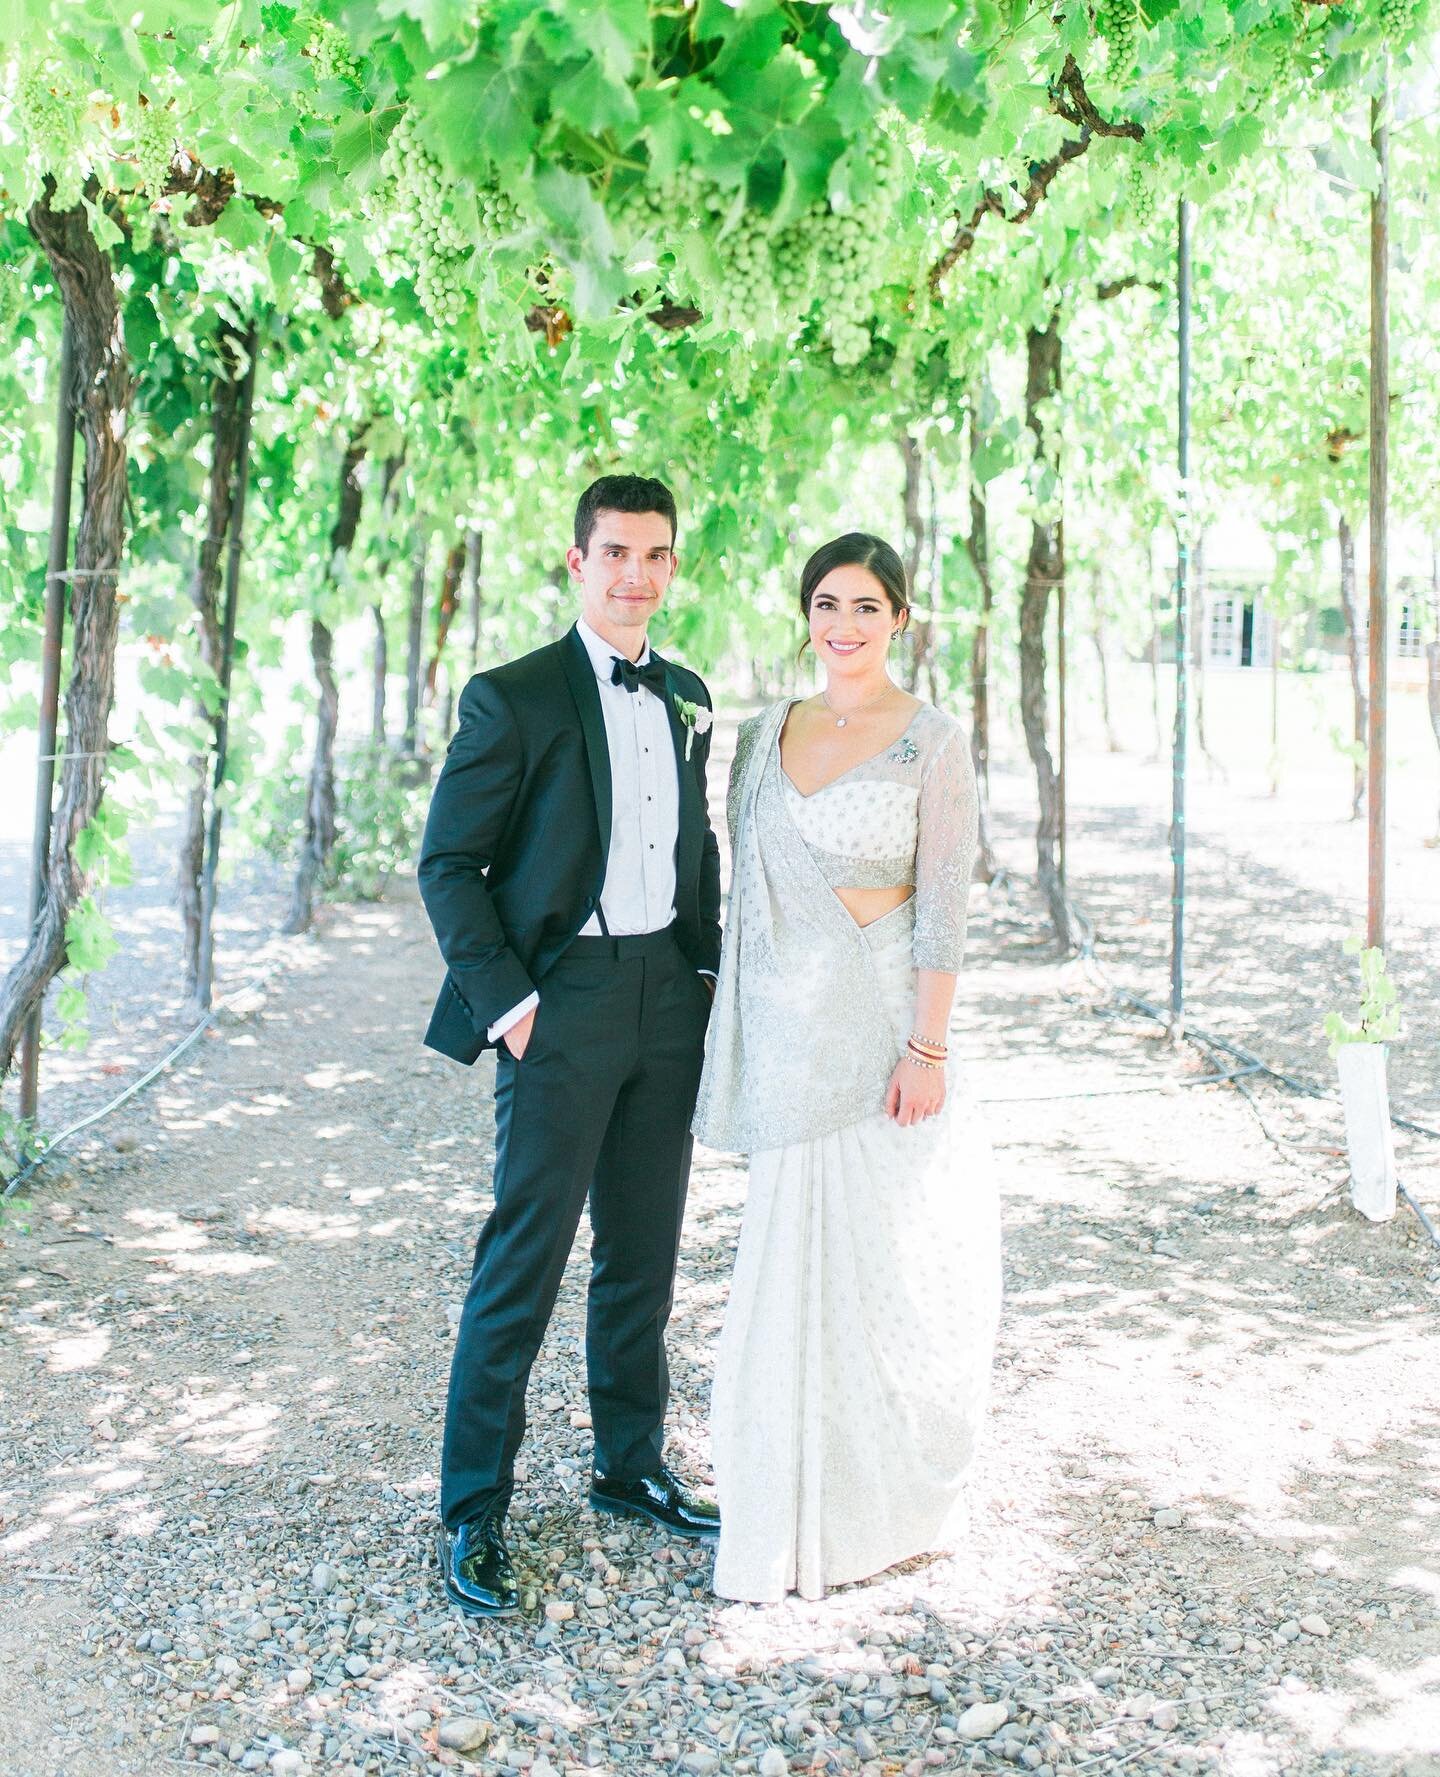 While Mariam and Danny are busy taking care of their sweet new addition to the family, we're reminiscing about their stunning wedding in the vineyards at Trentadue!
⁠⠀
We were so relieved to know that Trentadue and other places we love near Healdsbur